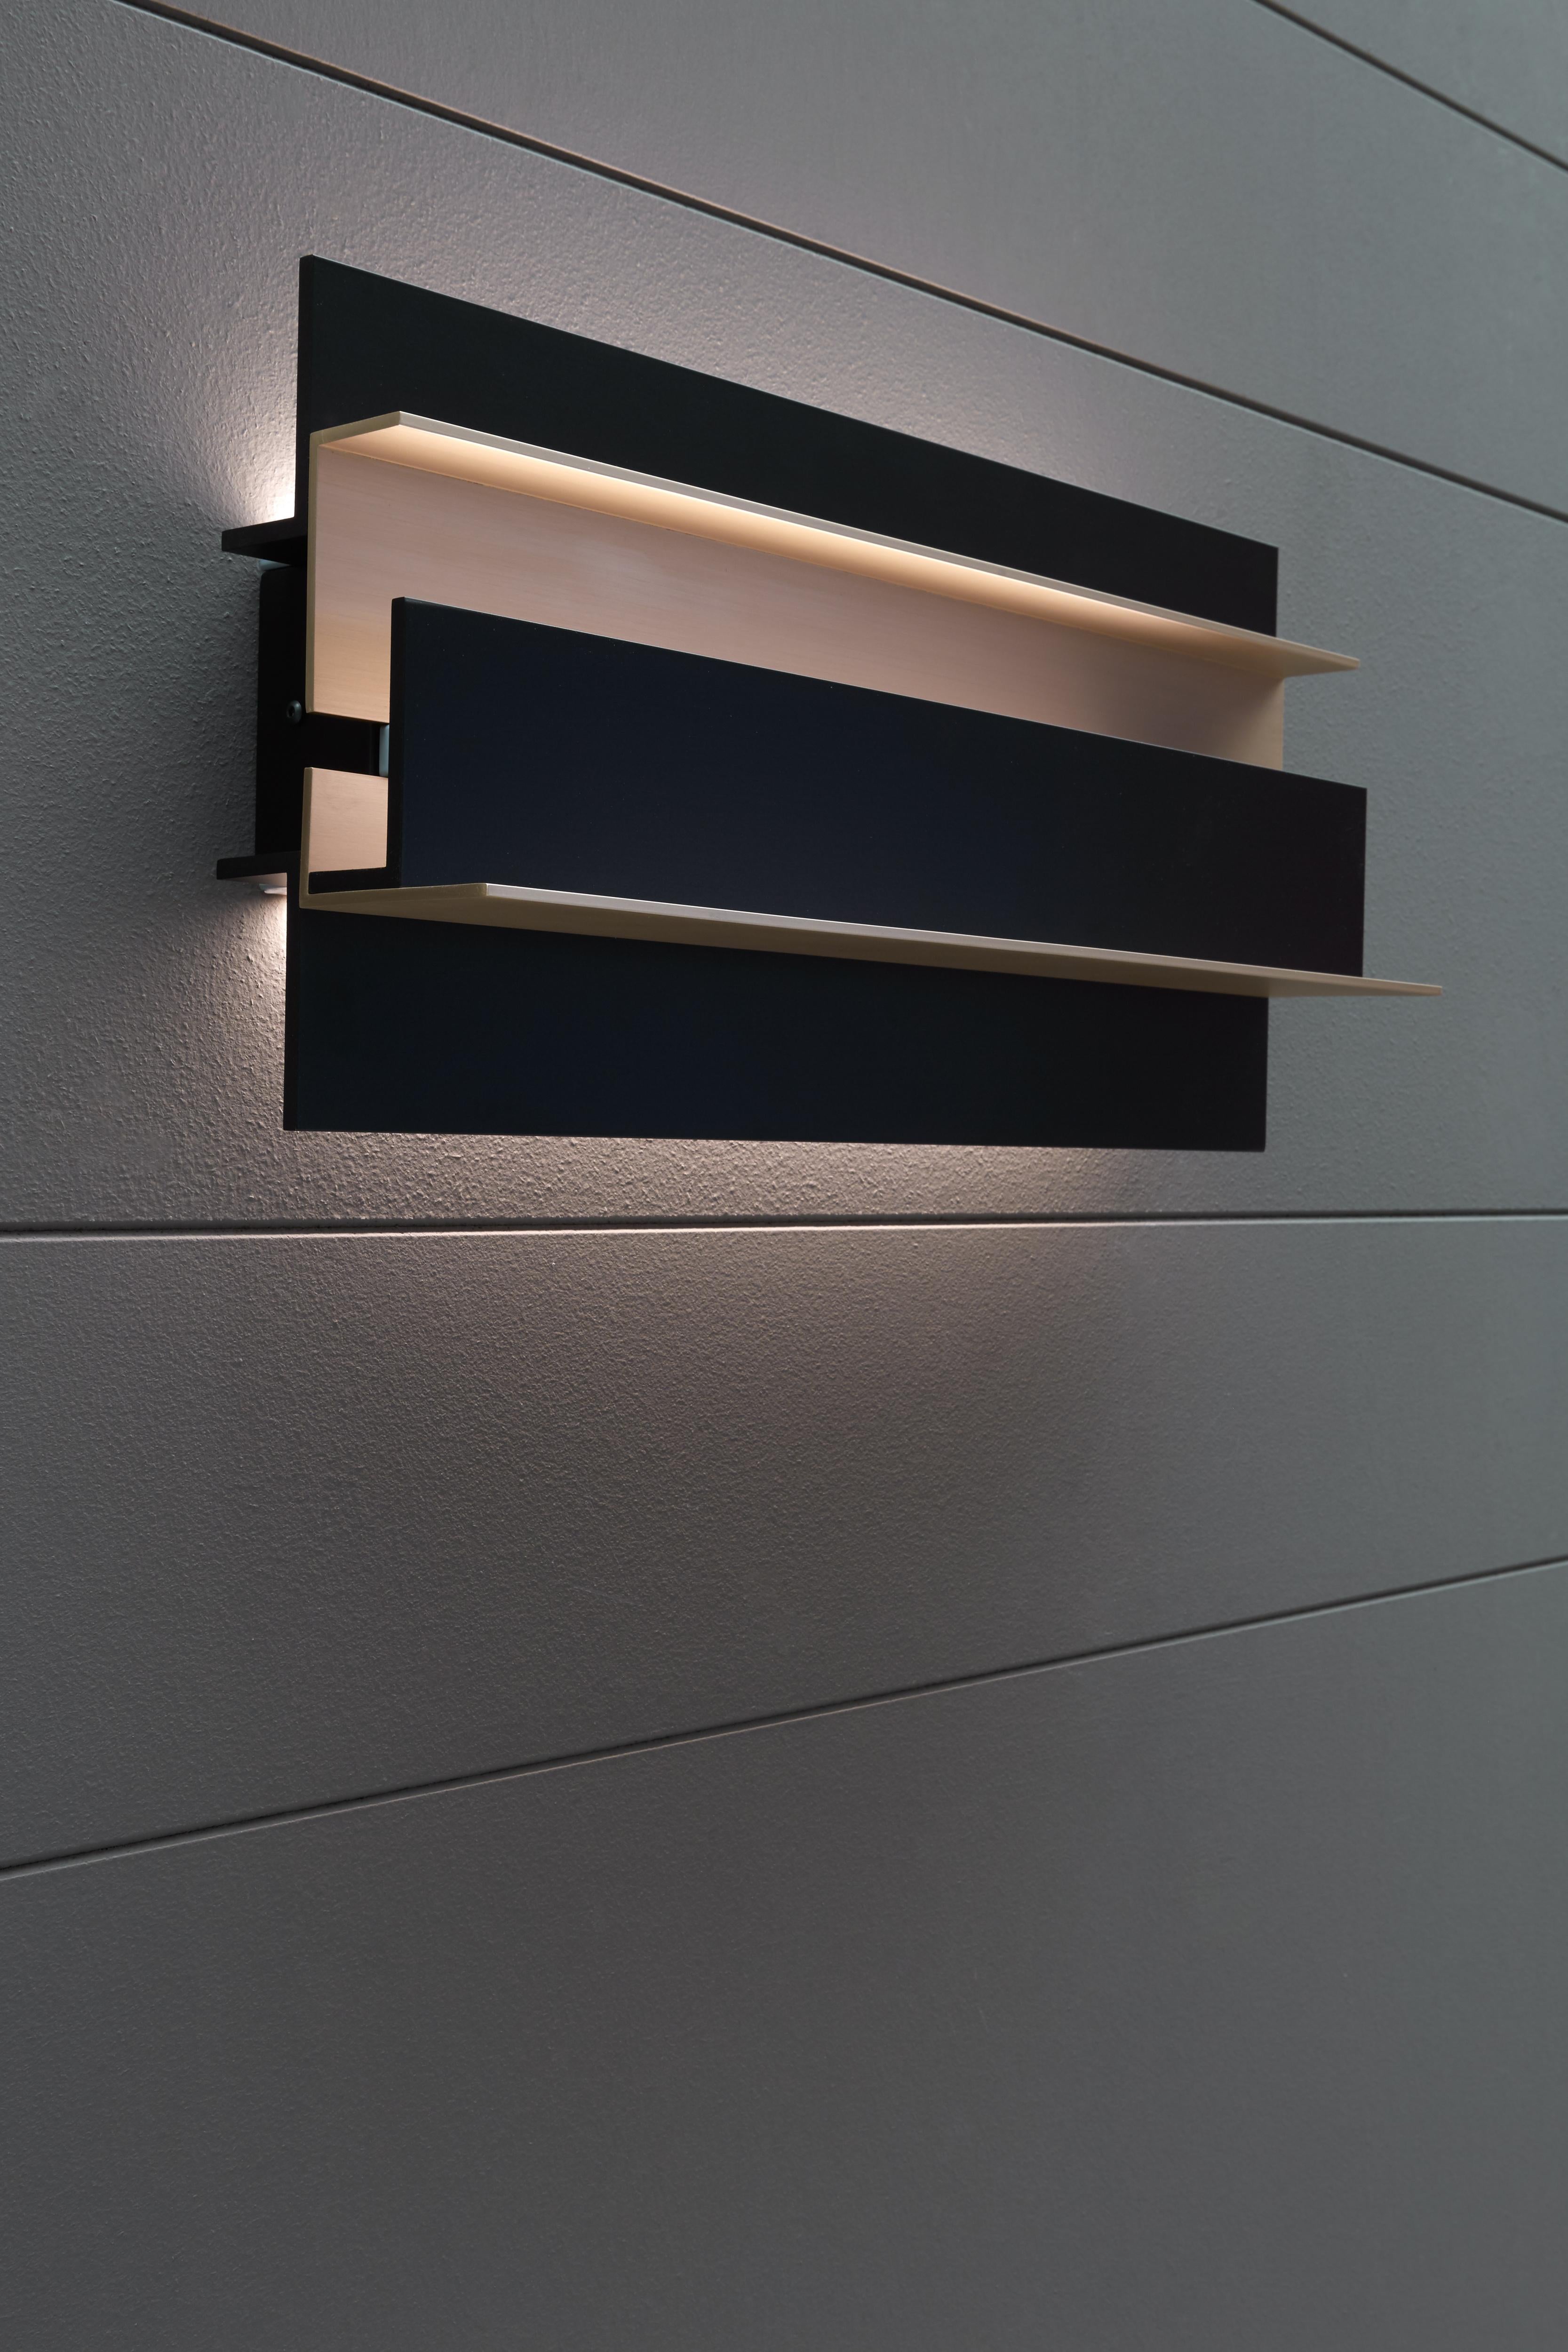 Wall lamp with indirect light. Light burnished brass and matte black structure.

Location: Interior
Light source: Strip LED 13W 1670lm 2700°K CRI80
Voltage: 110-120 V / 220-240 V
Frequency: 50-60 Hz
Ballast: Ballast included
Mounting: Wall.